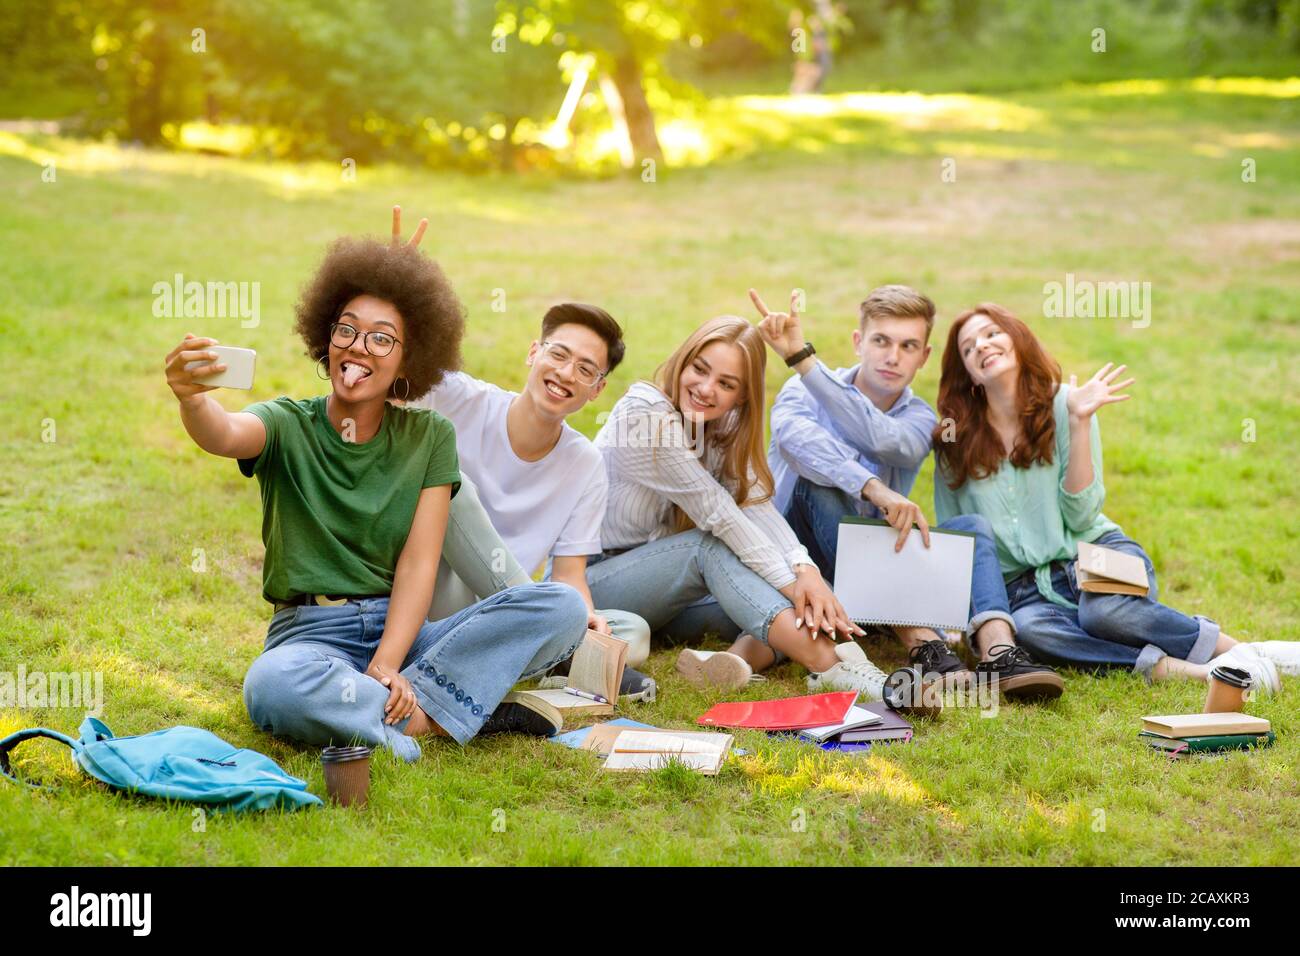 Selfie Fun. Group Of Multiracial Students Fooling While Taking Group Photo Outdoors Stock Photo